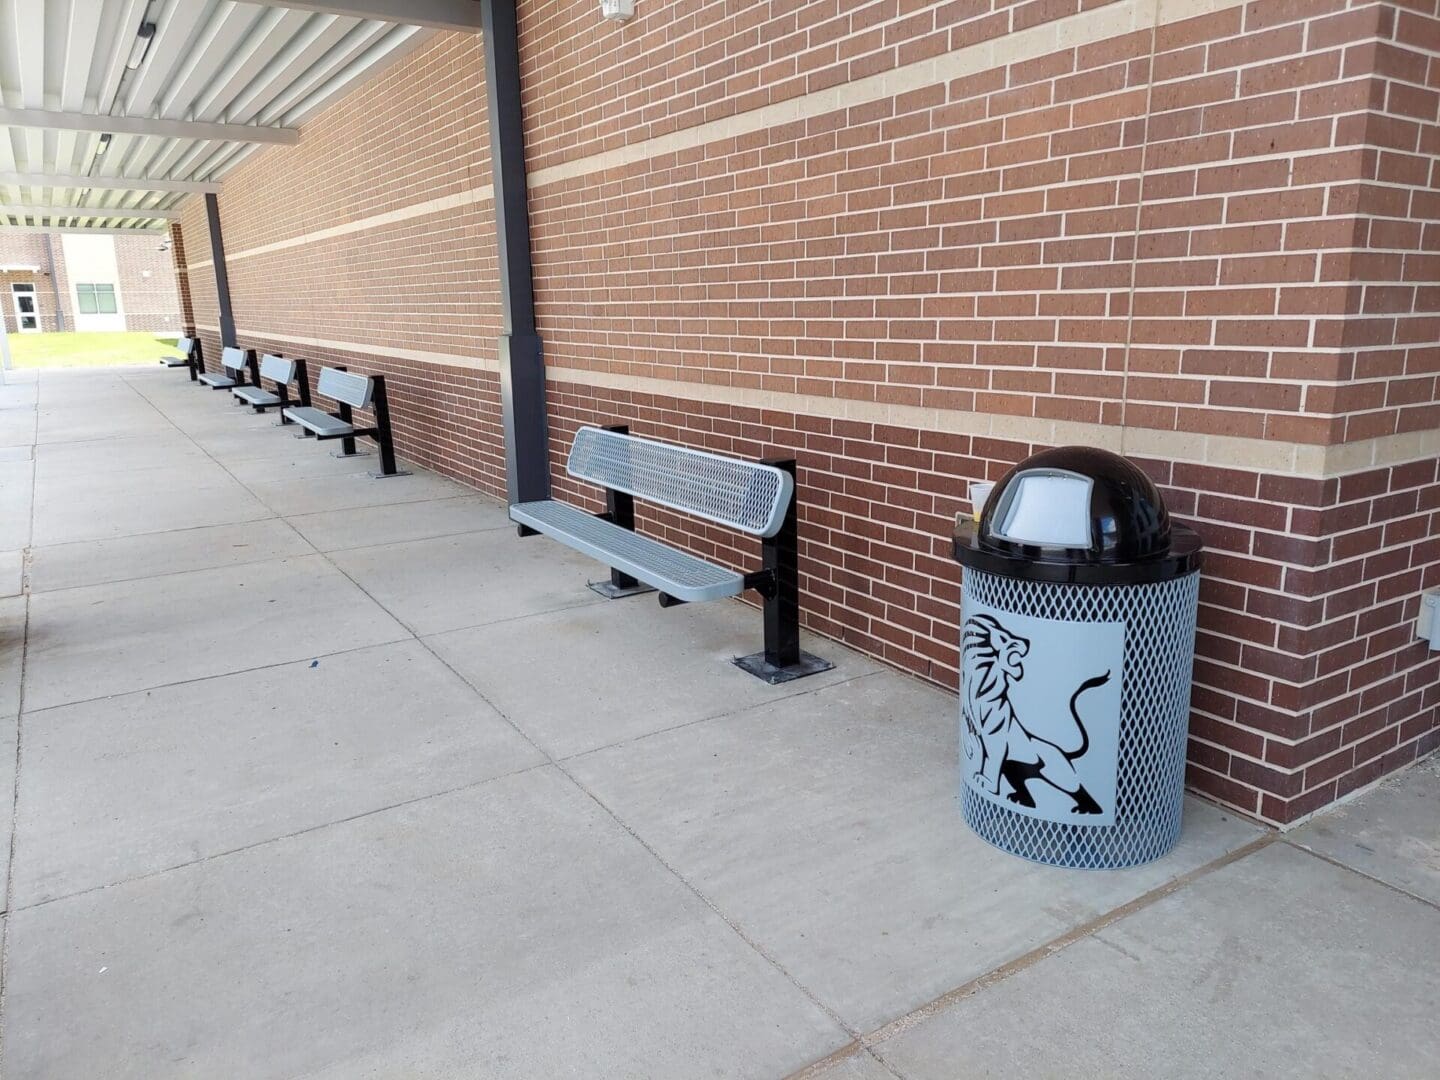 A bench and trash can are on the sidewalk.